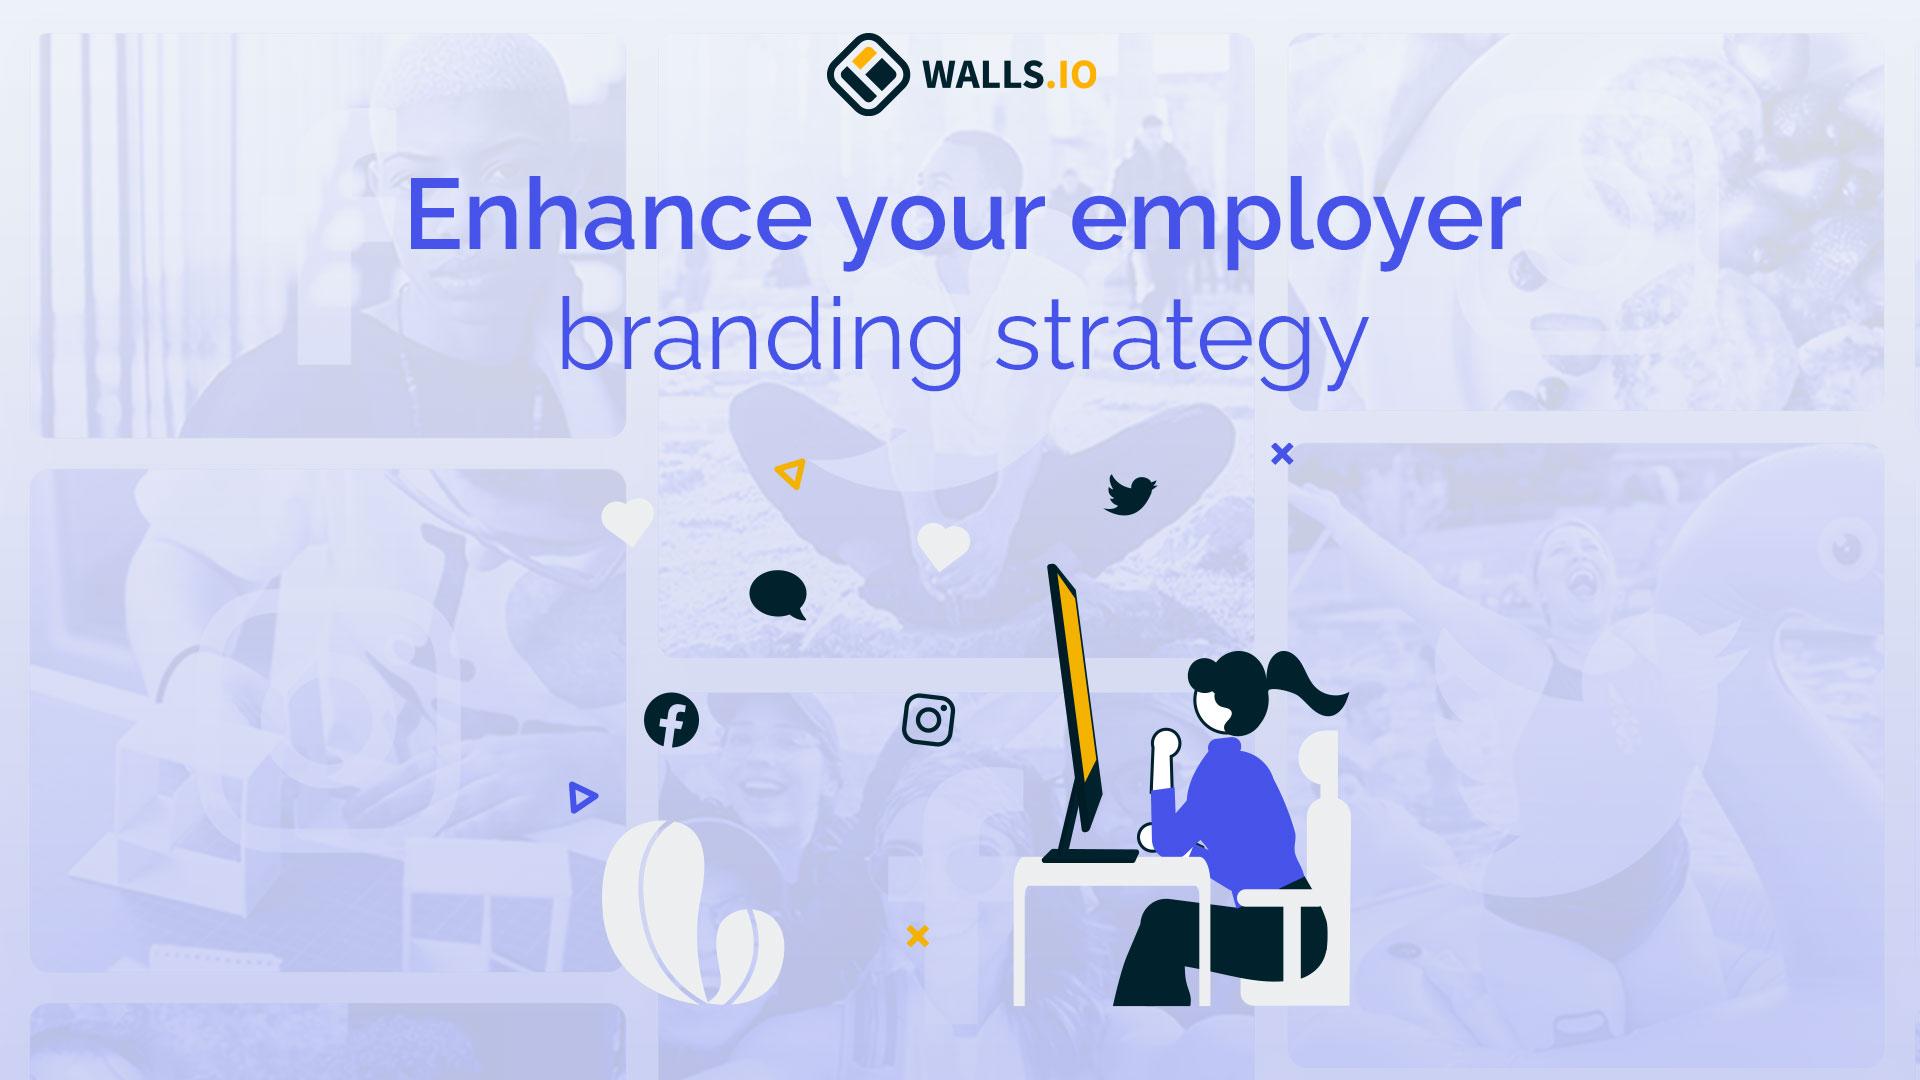 Product: Enhance your employer branding strategy with a social wall